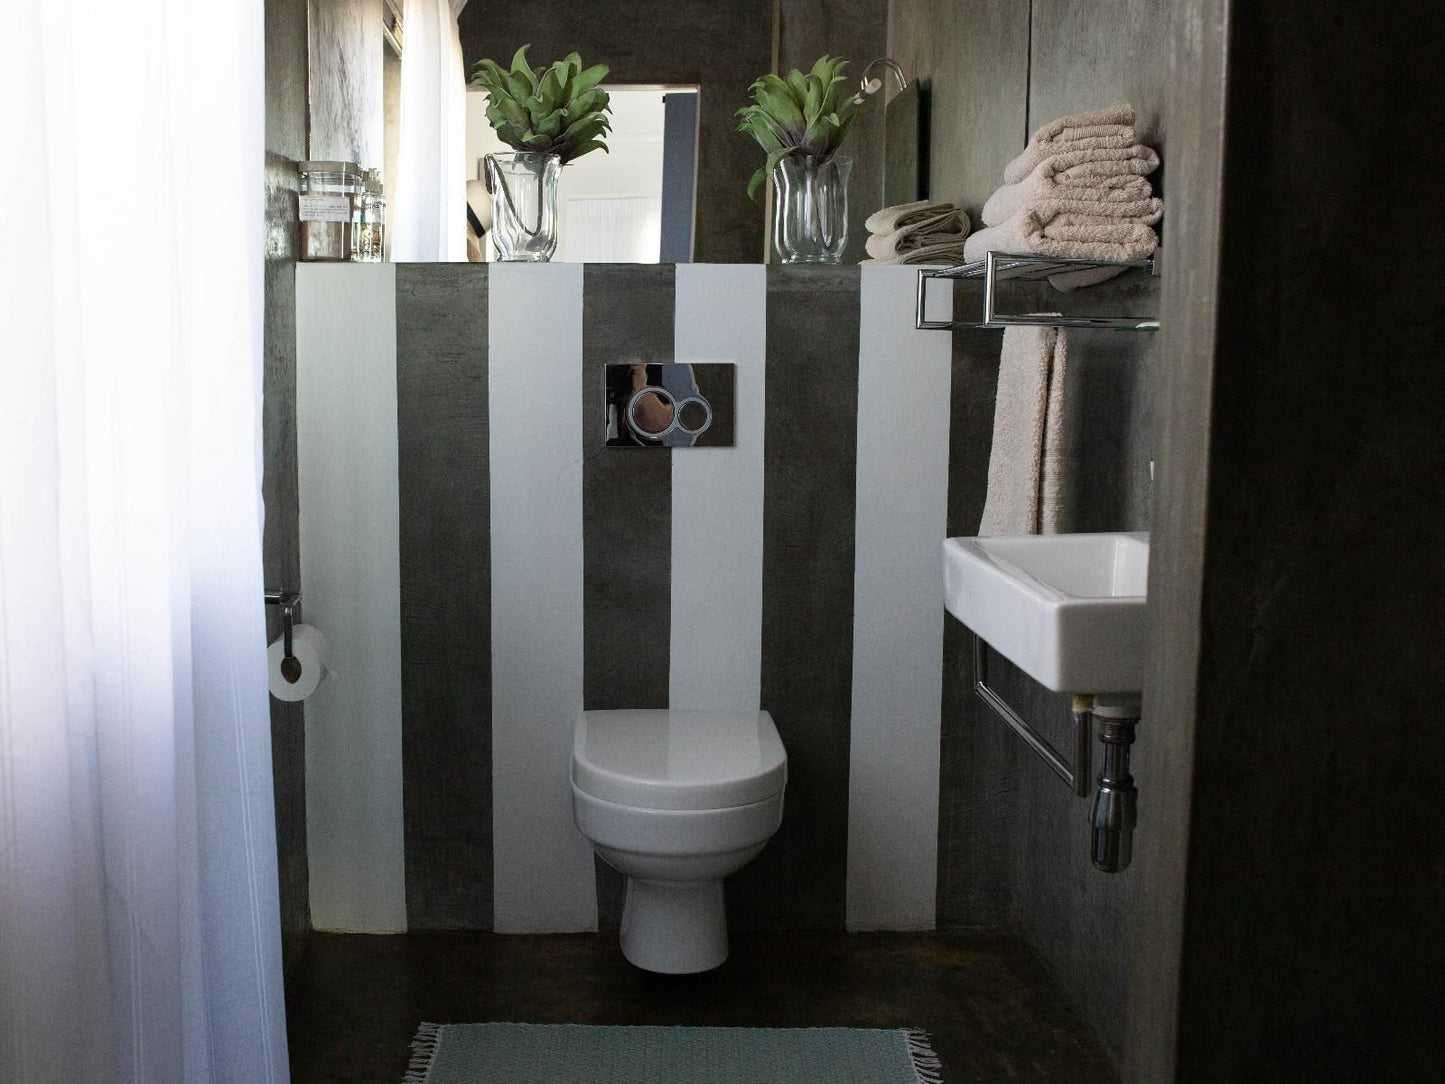 Stay At Friends Bettys Bay Western Cape South Africa Unsaturated, Bathroom